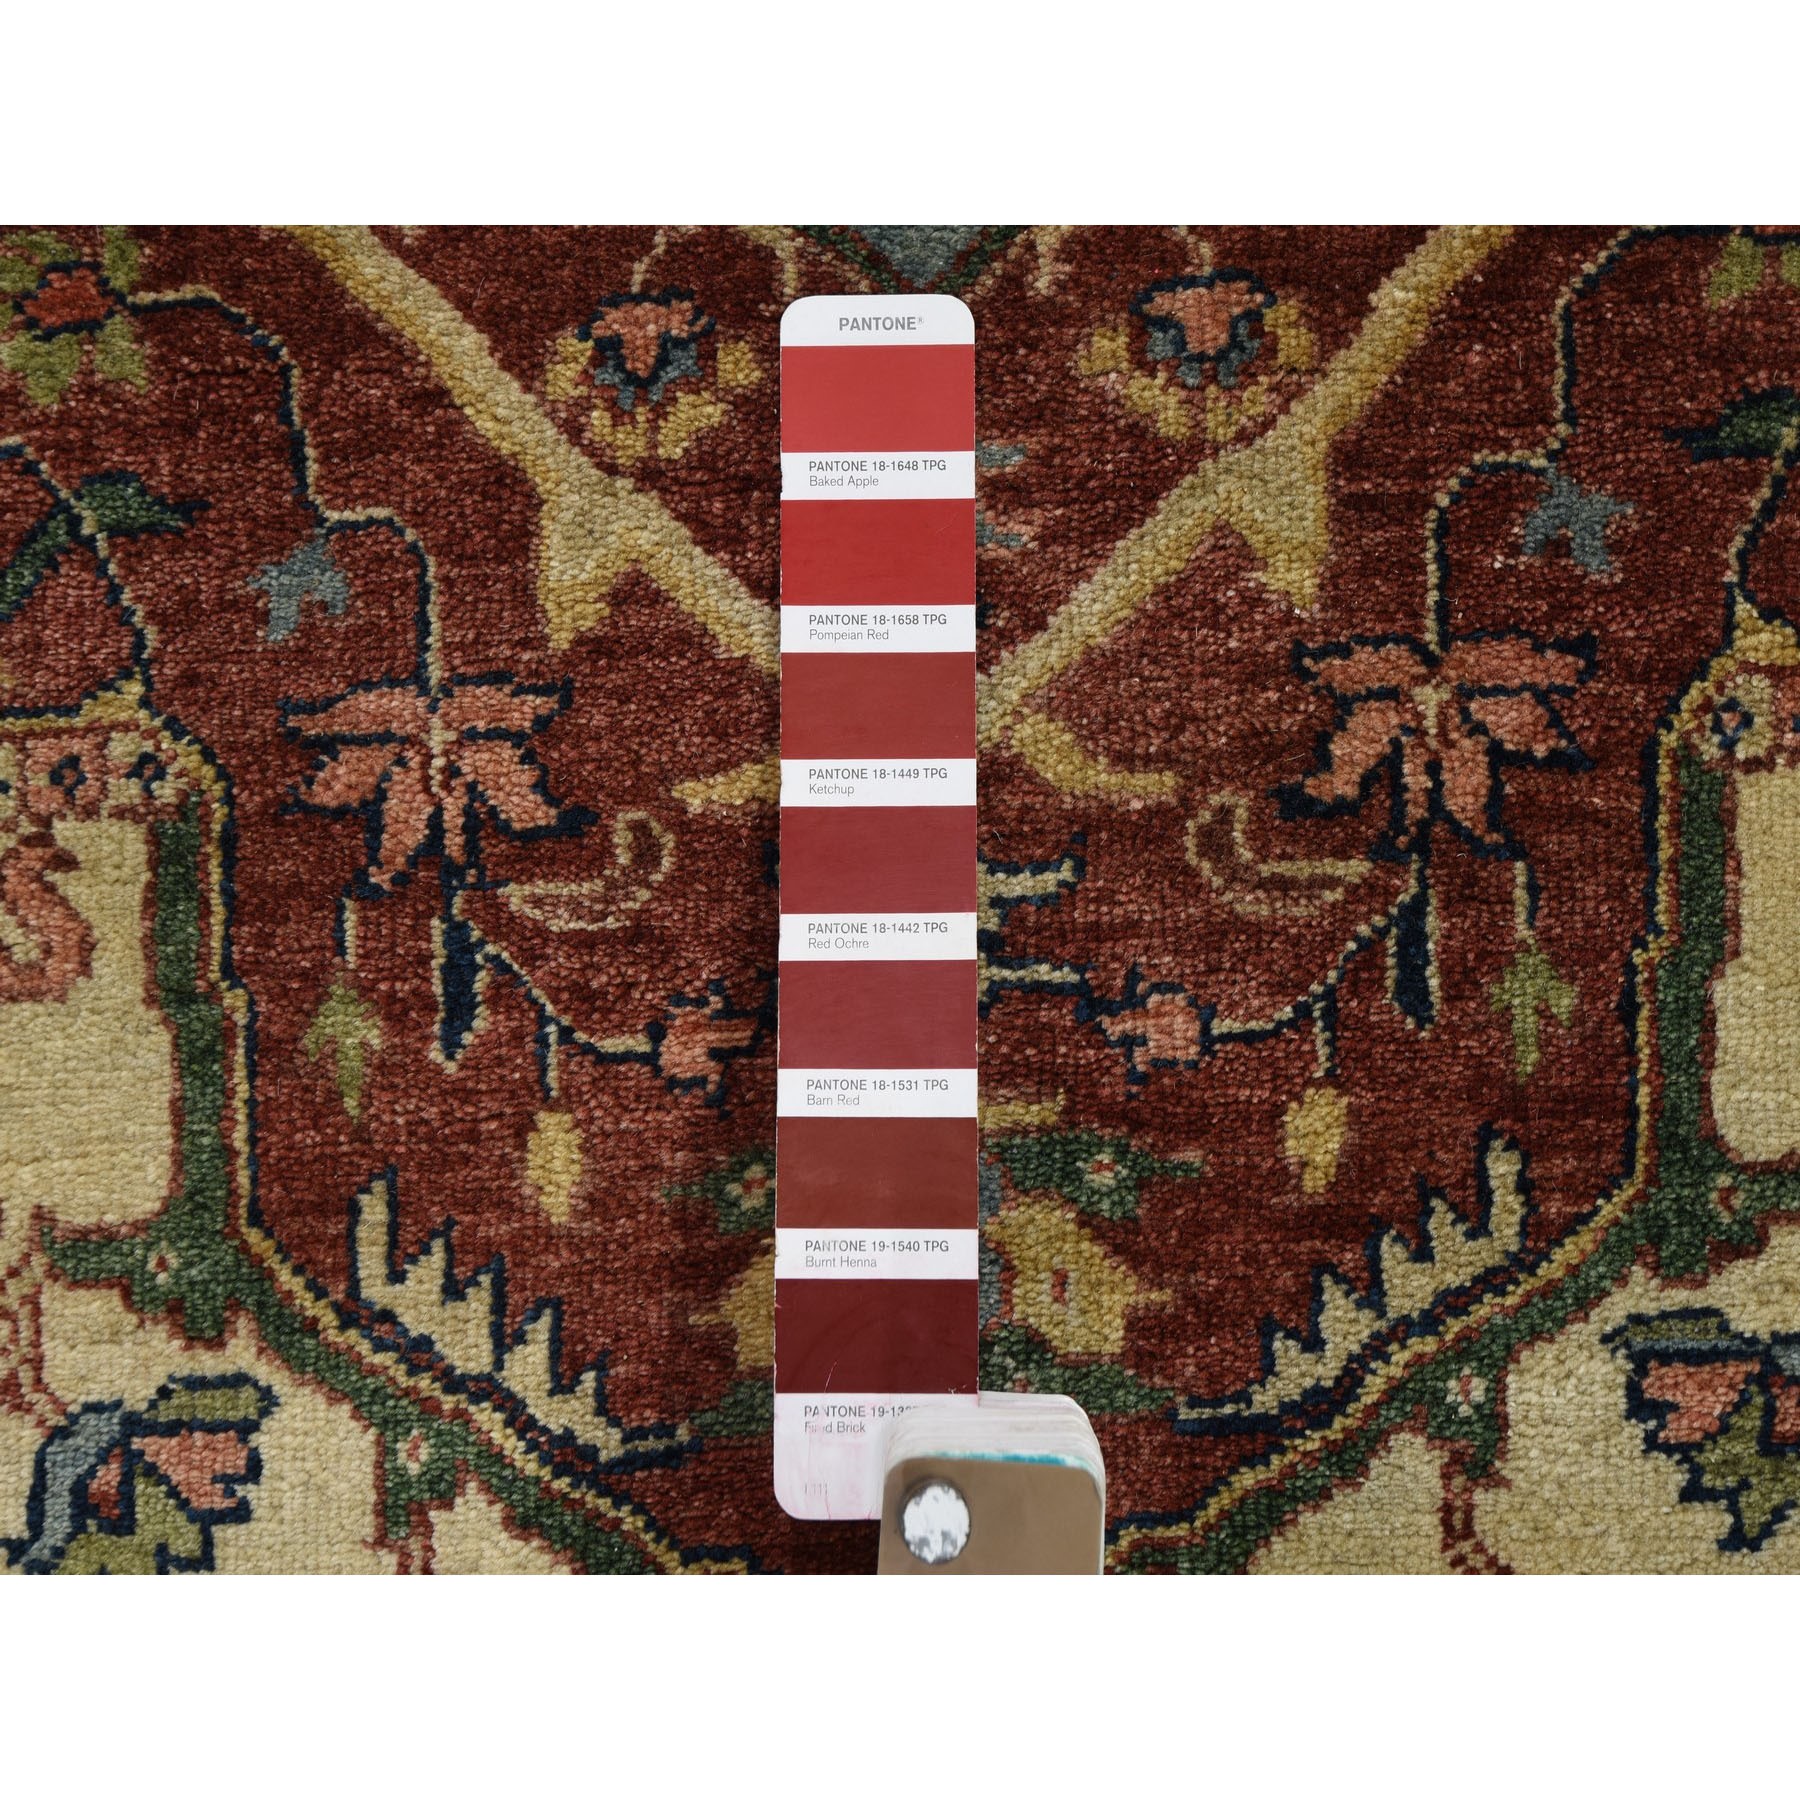 8-x10- Antiqued Heriz Re-Creation Hand Knotted Pure Wool Oriental Rug 